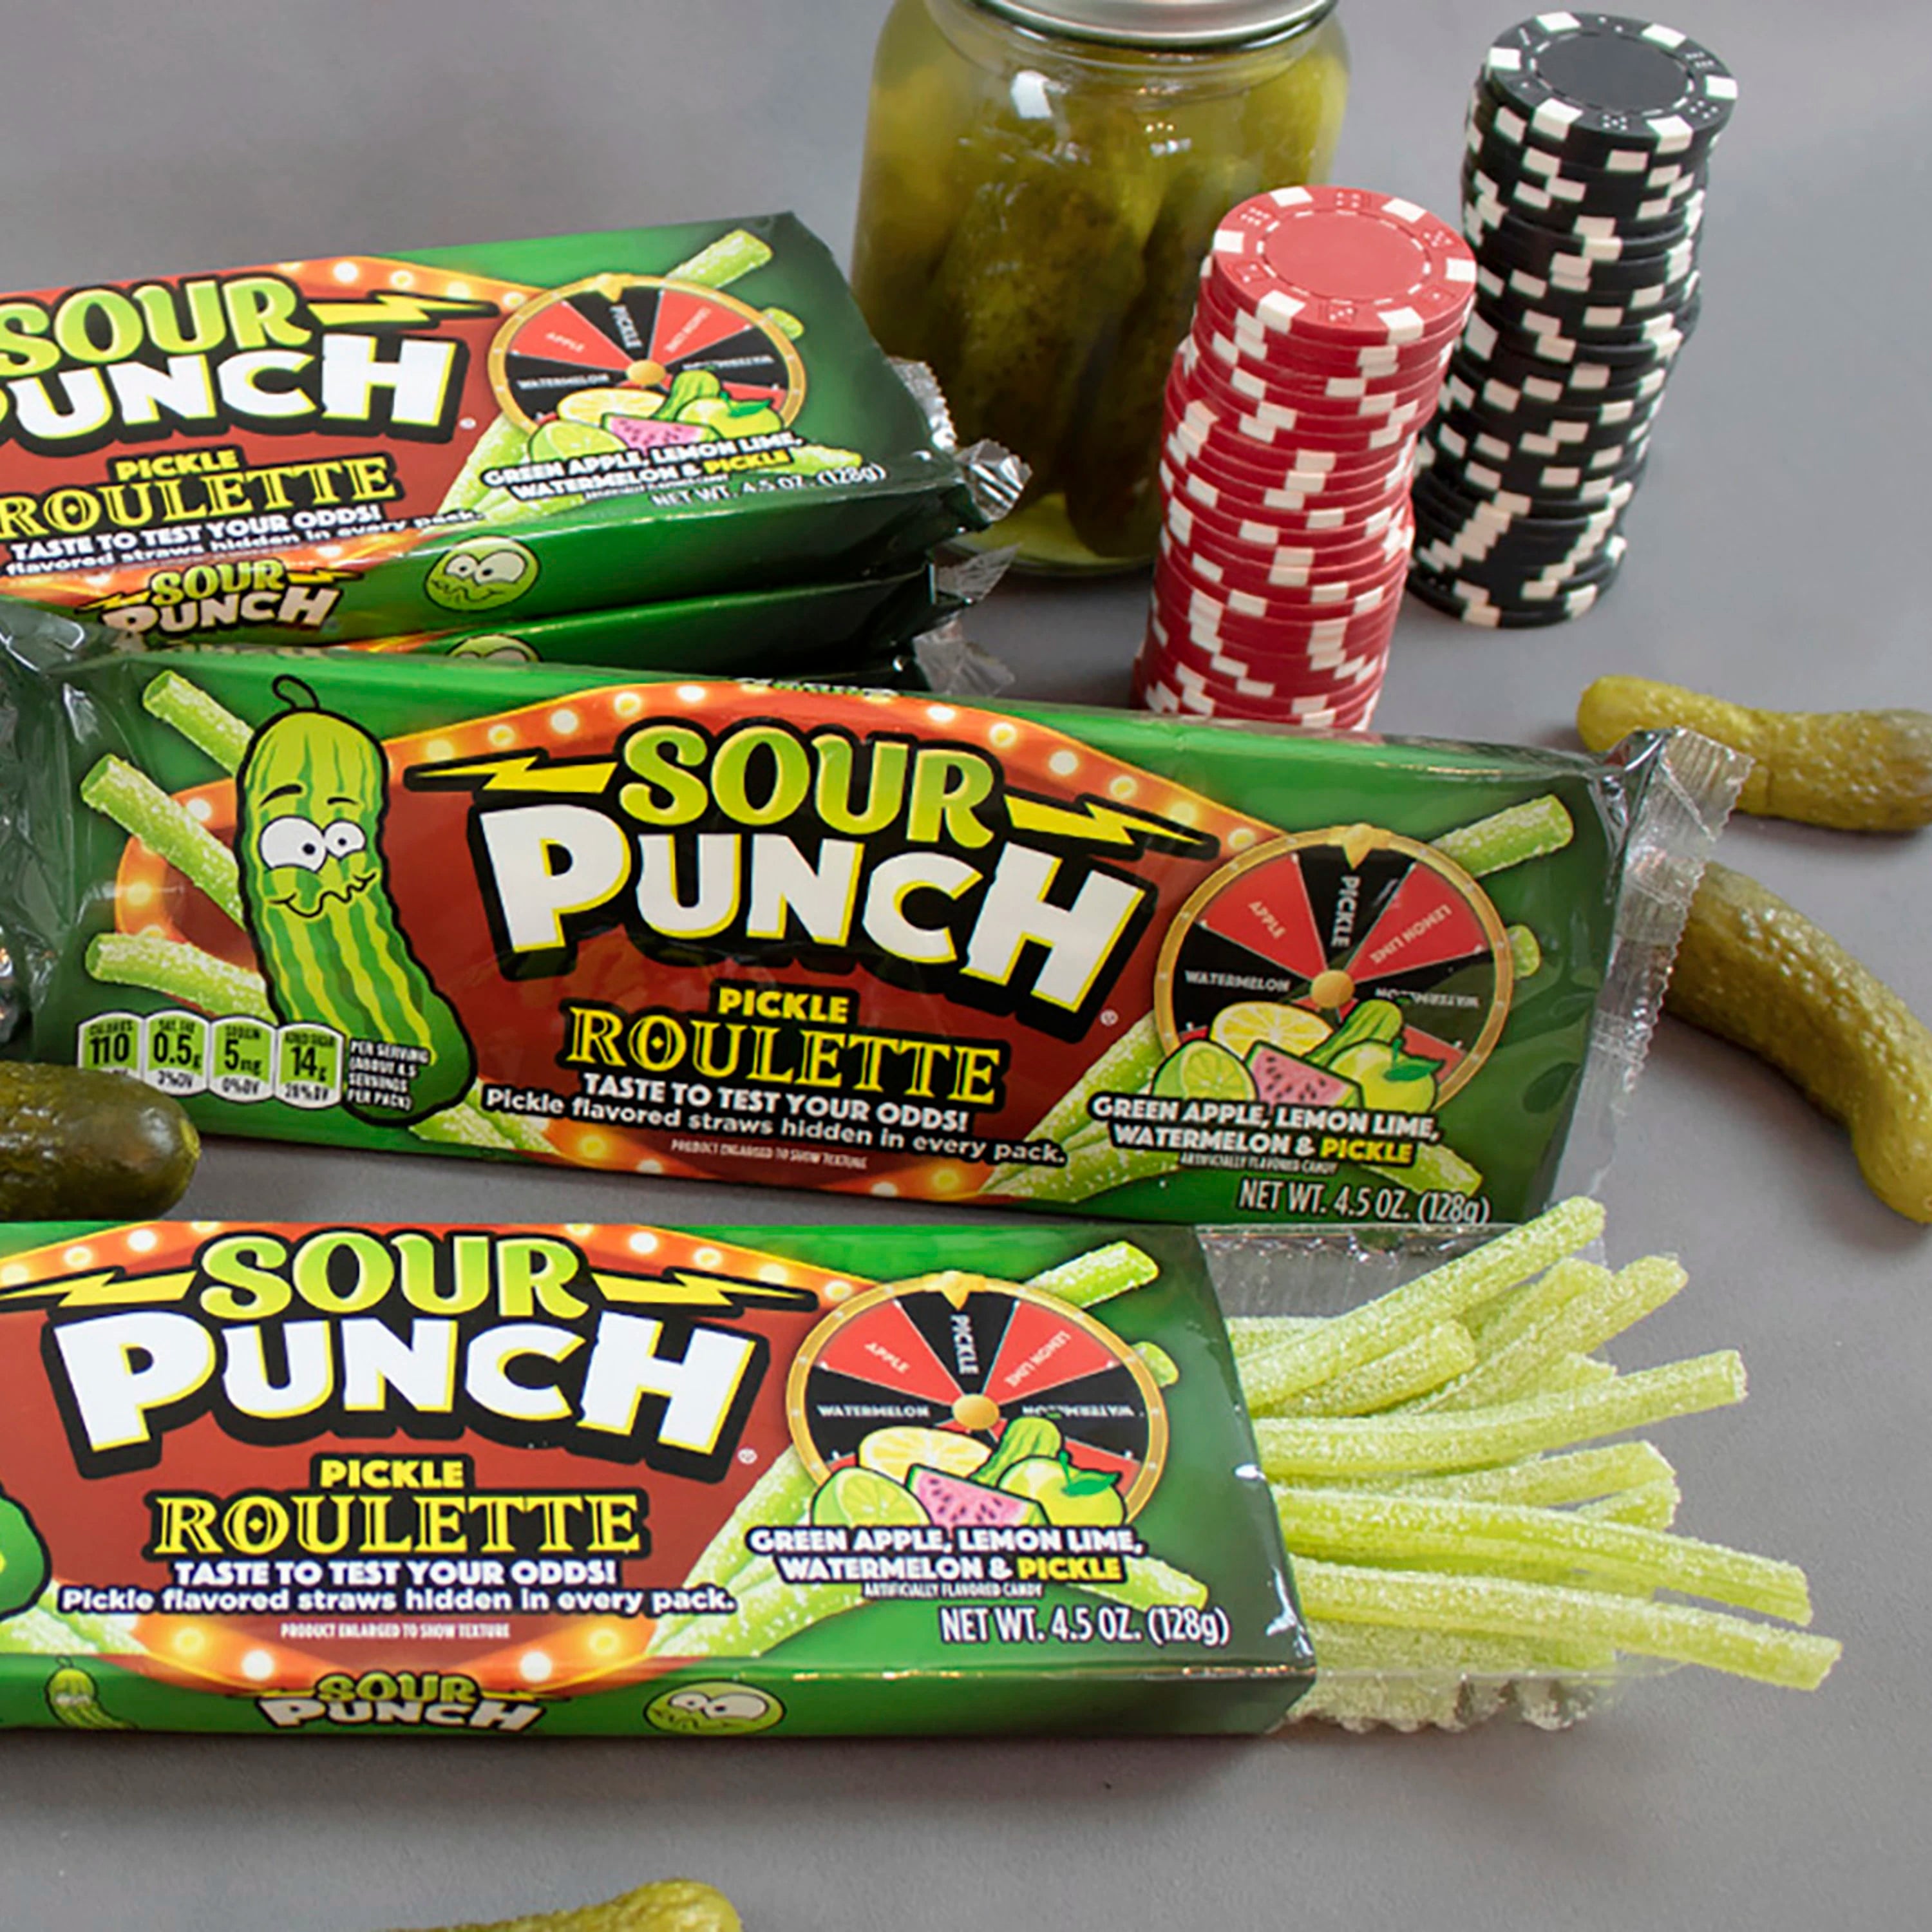 SOUR PUNCH Pickle Roulette Bites with real pickles and roulette game chips